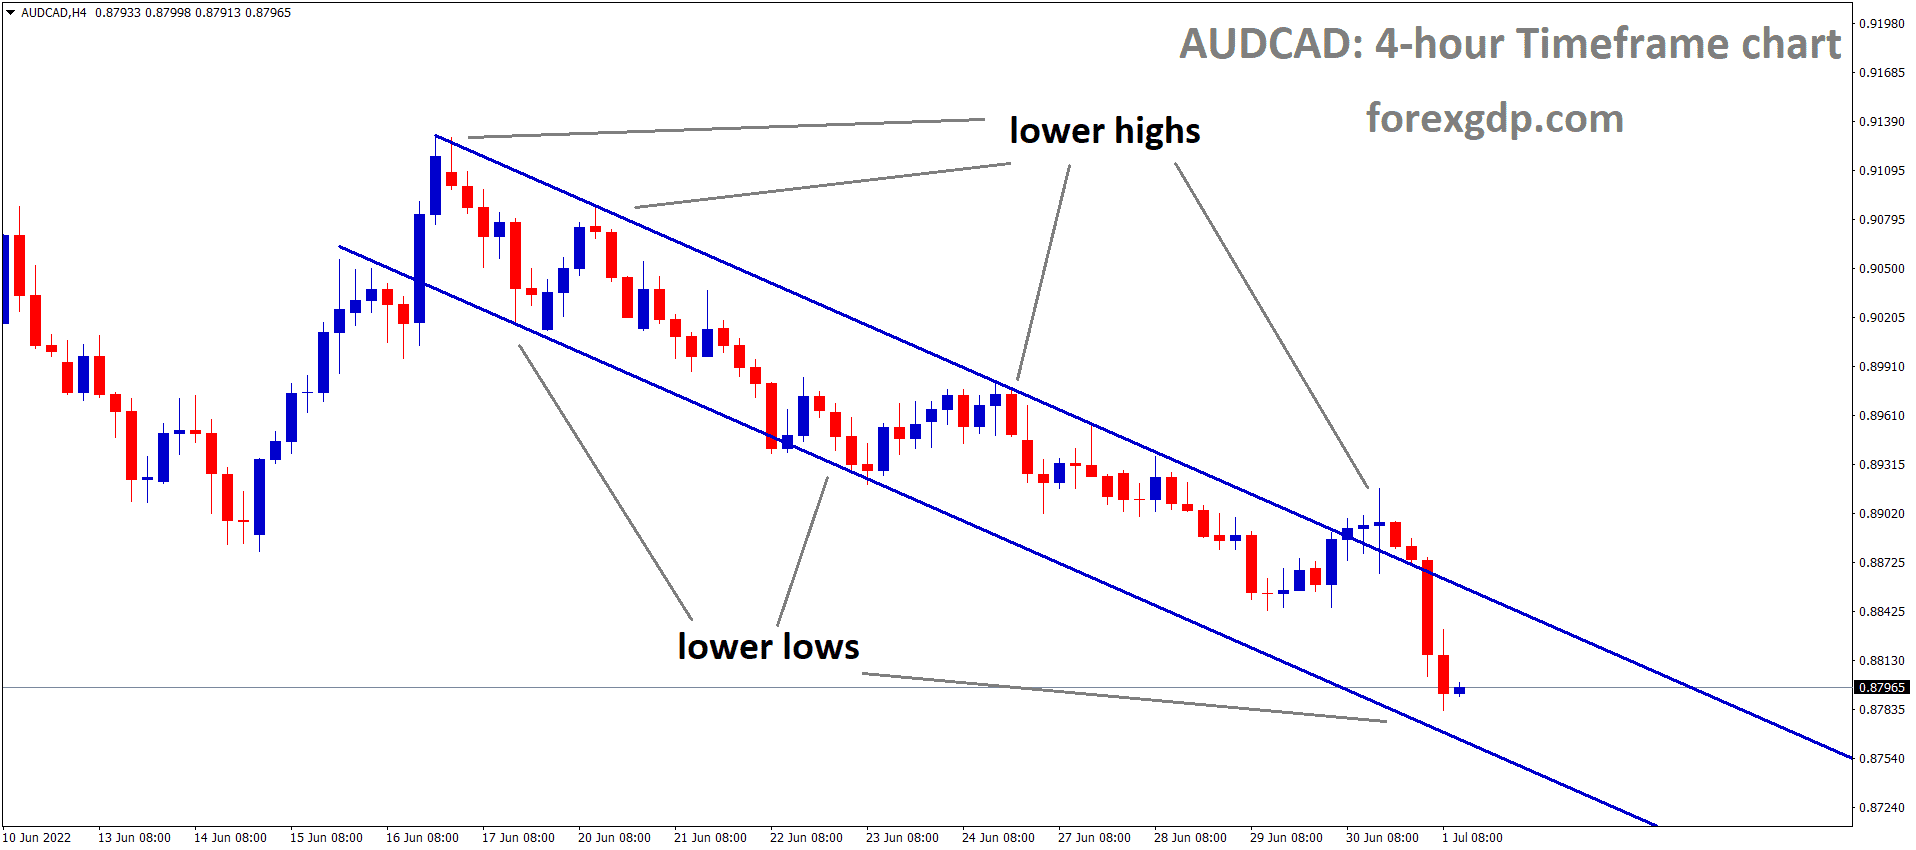 AUDCAD is moving in the Descending channel and the Market has reached the Lower Low area of the channel